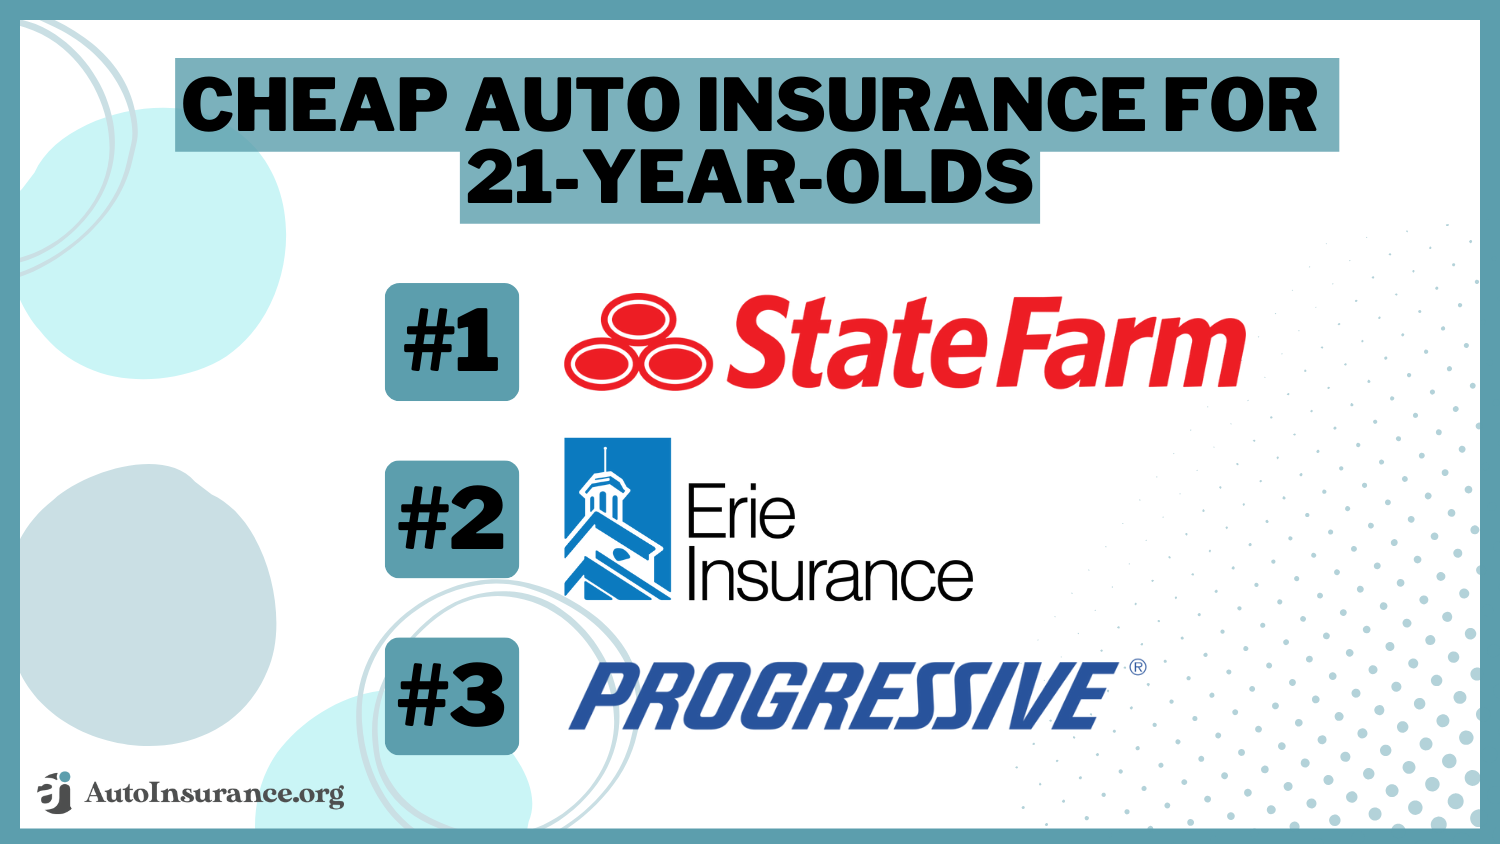 Cheap Auto Insurance for 21-Year-Olds